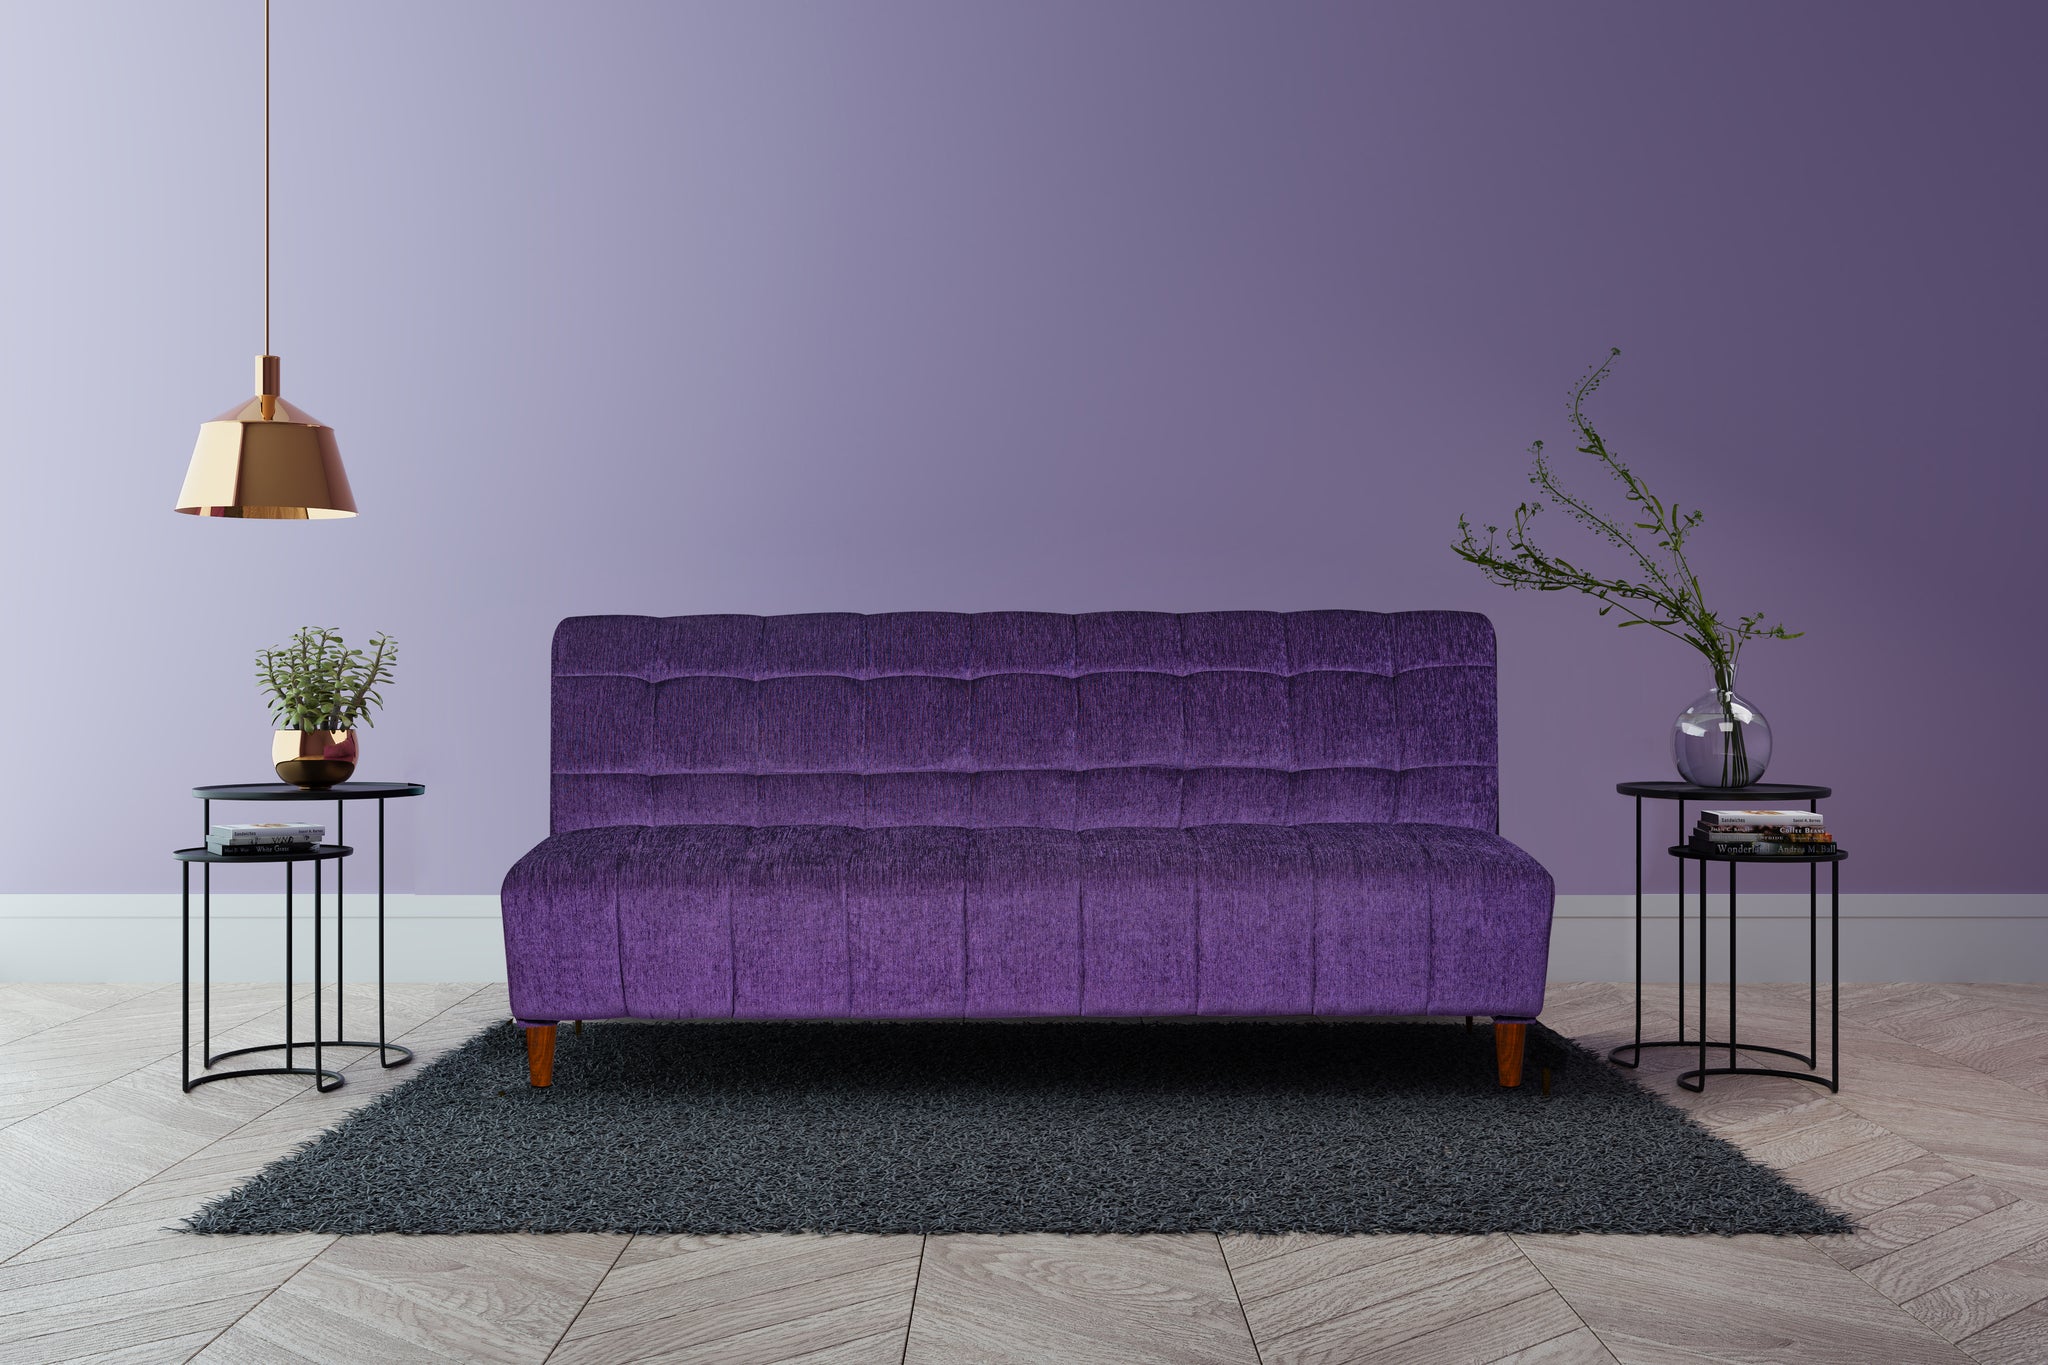 Seventh Heaven Florida 4 Seater Wooden Sofa Cum Bed. Modern & Elegant Smart Furniture Range for luxurious homes, living rooms and offices. Use as a sofa, lounger or bed. Perfect for guests. Molphino fabric with sheesham polished wooden legs. Purple colour.